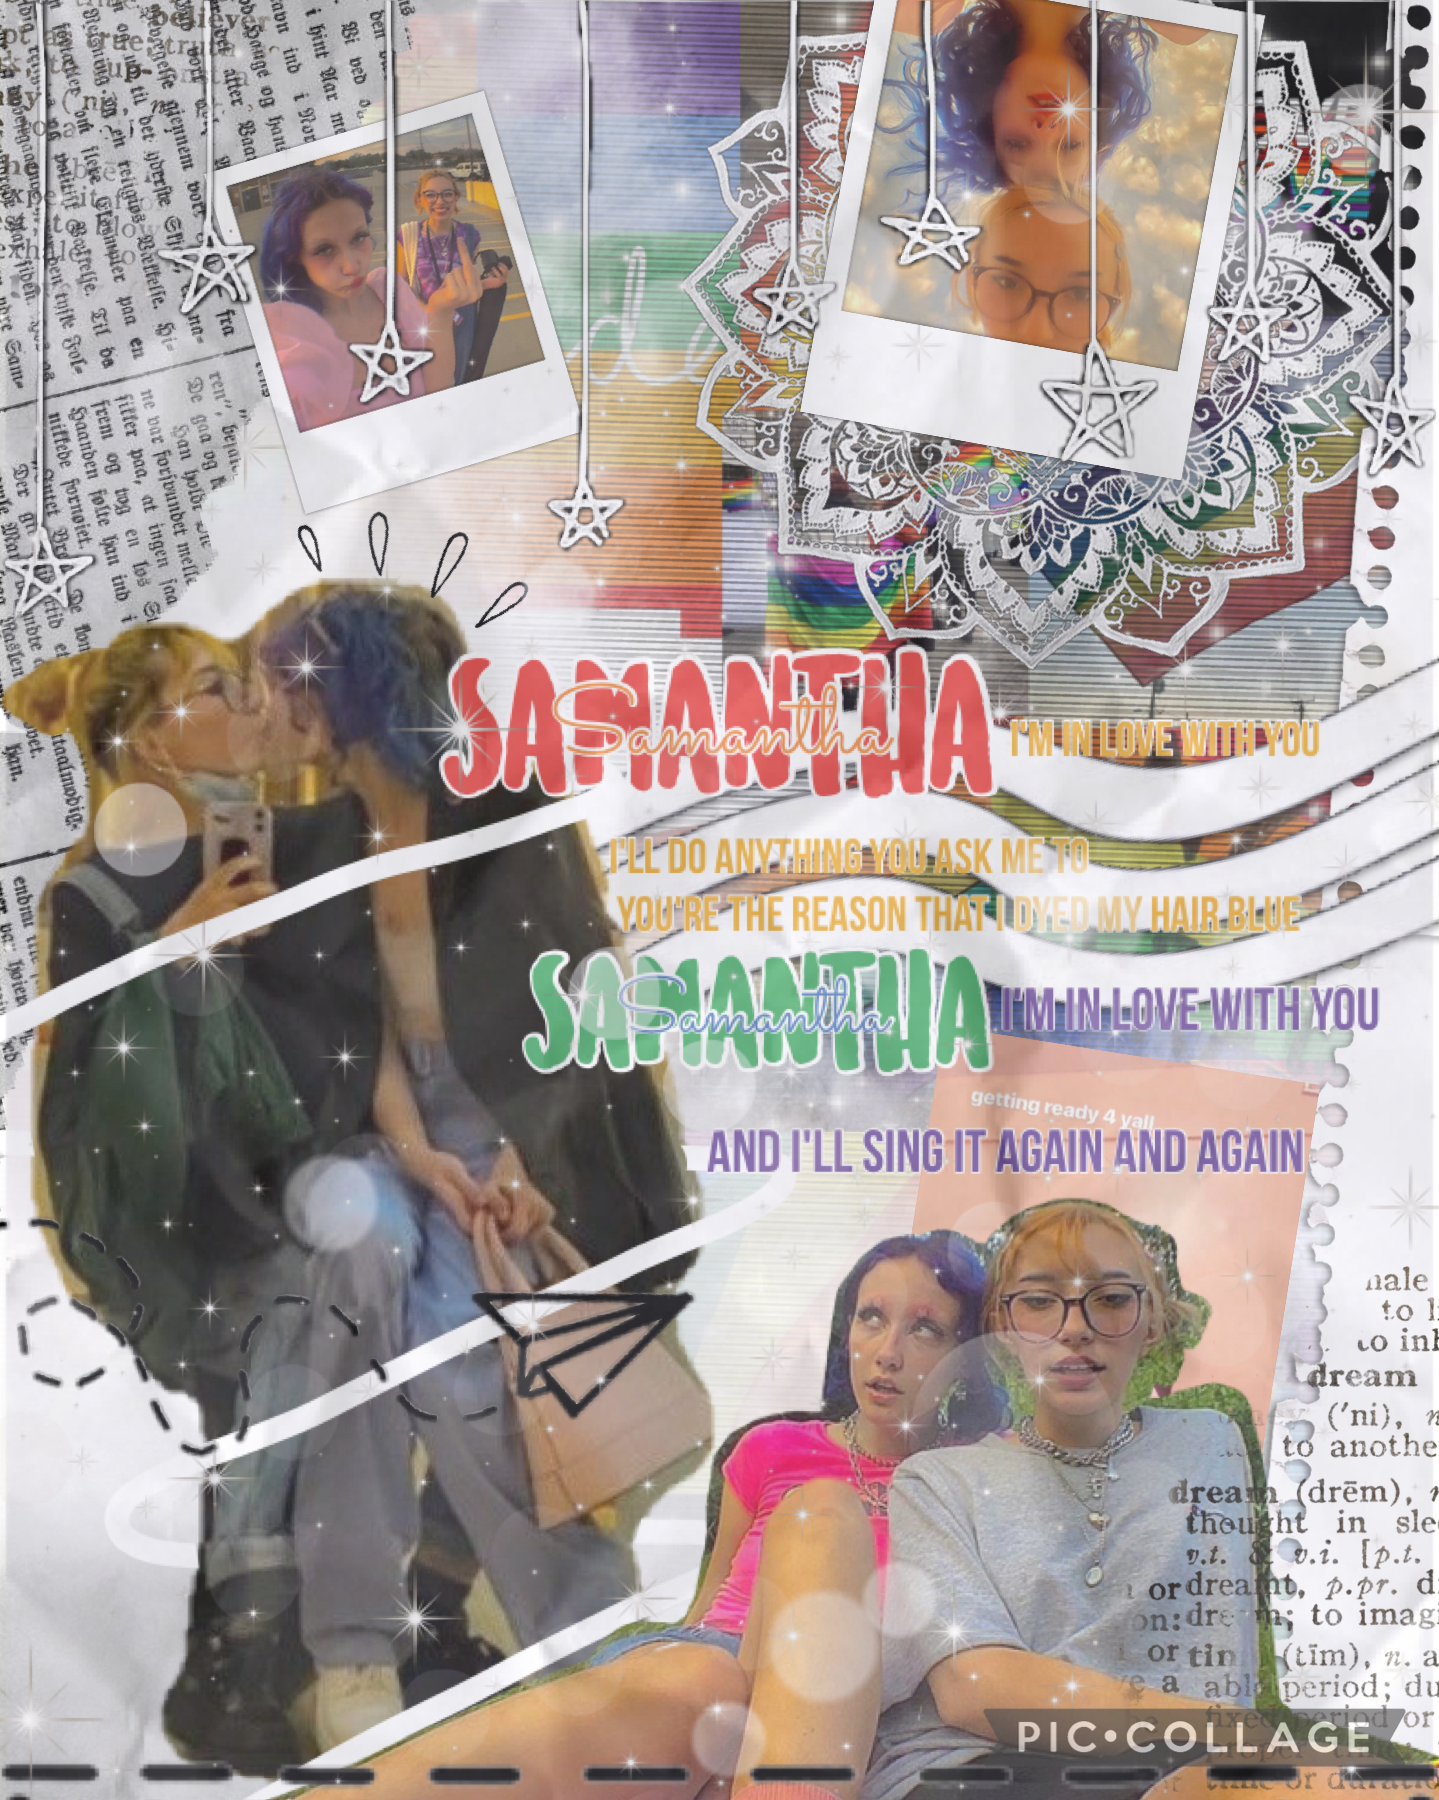 ❤️ TAP 🧡
💛 chloe moriondo and Samantha collage!! 💚
💙 yes, chloe and Samantha are girlfriends 💜
❤️ lyrics from chloes song ‘Samantha’!! 🧡
💛 this is for pride month 😁 💚
💙 ilysm!! Hope u guys have an amazing pride month!! Xx💜